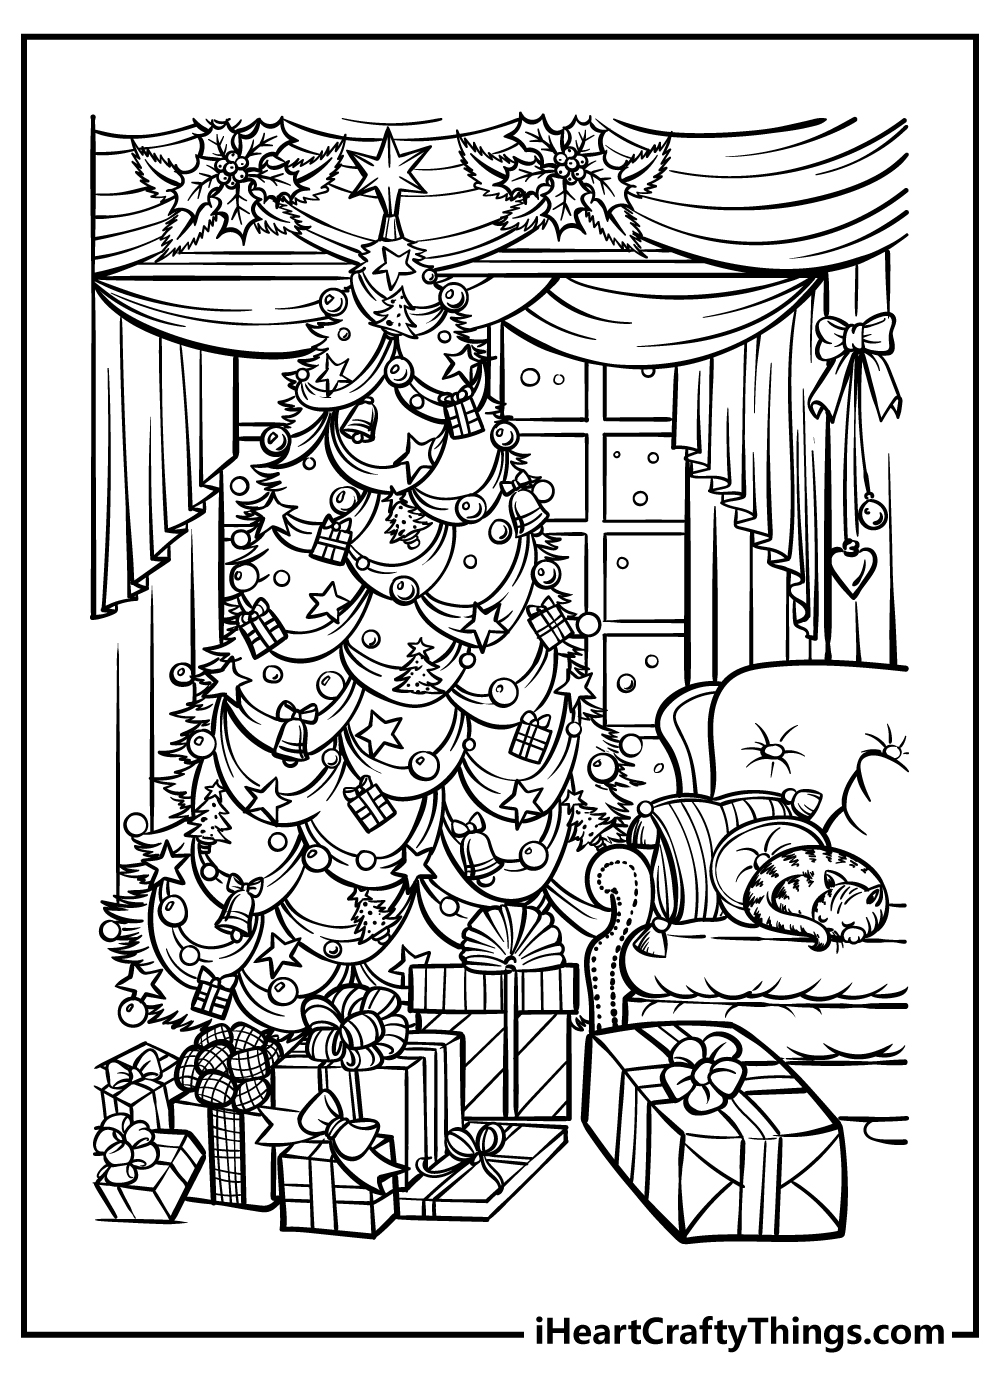 Christmas Coloring Pages for kids free download